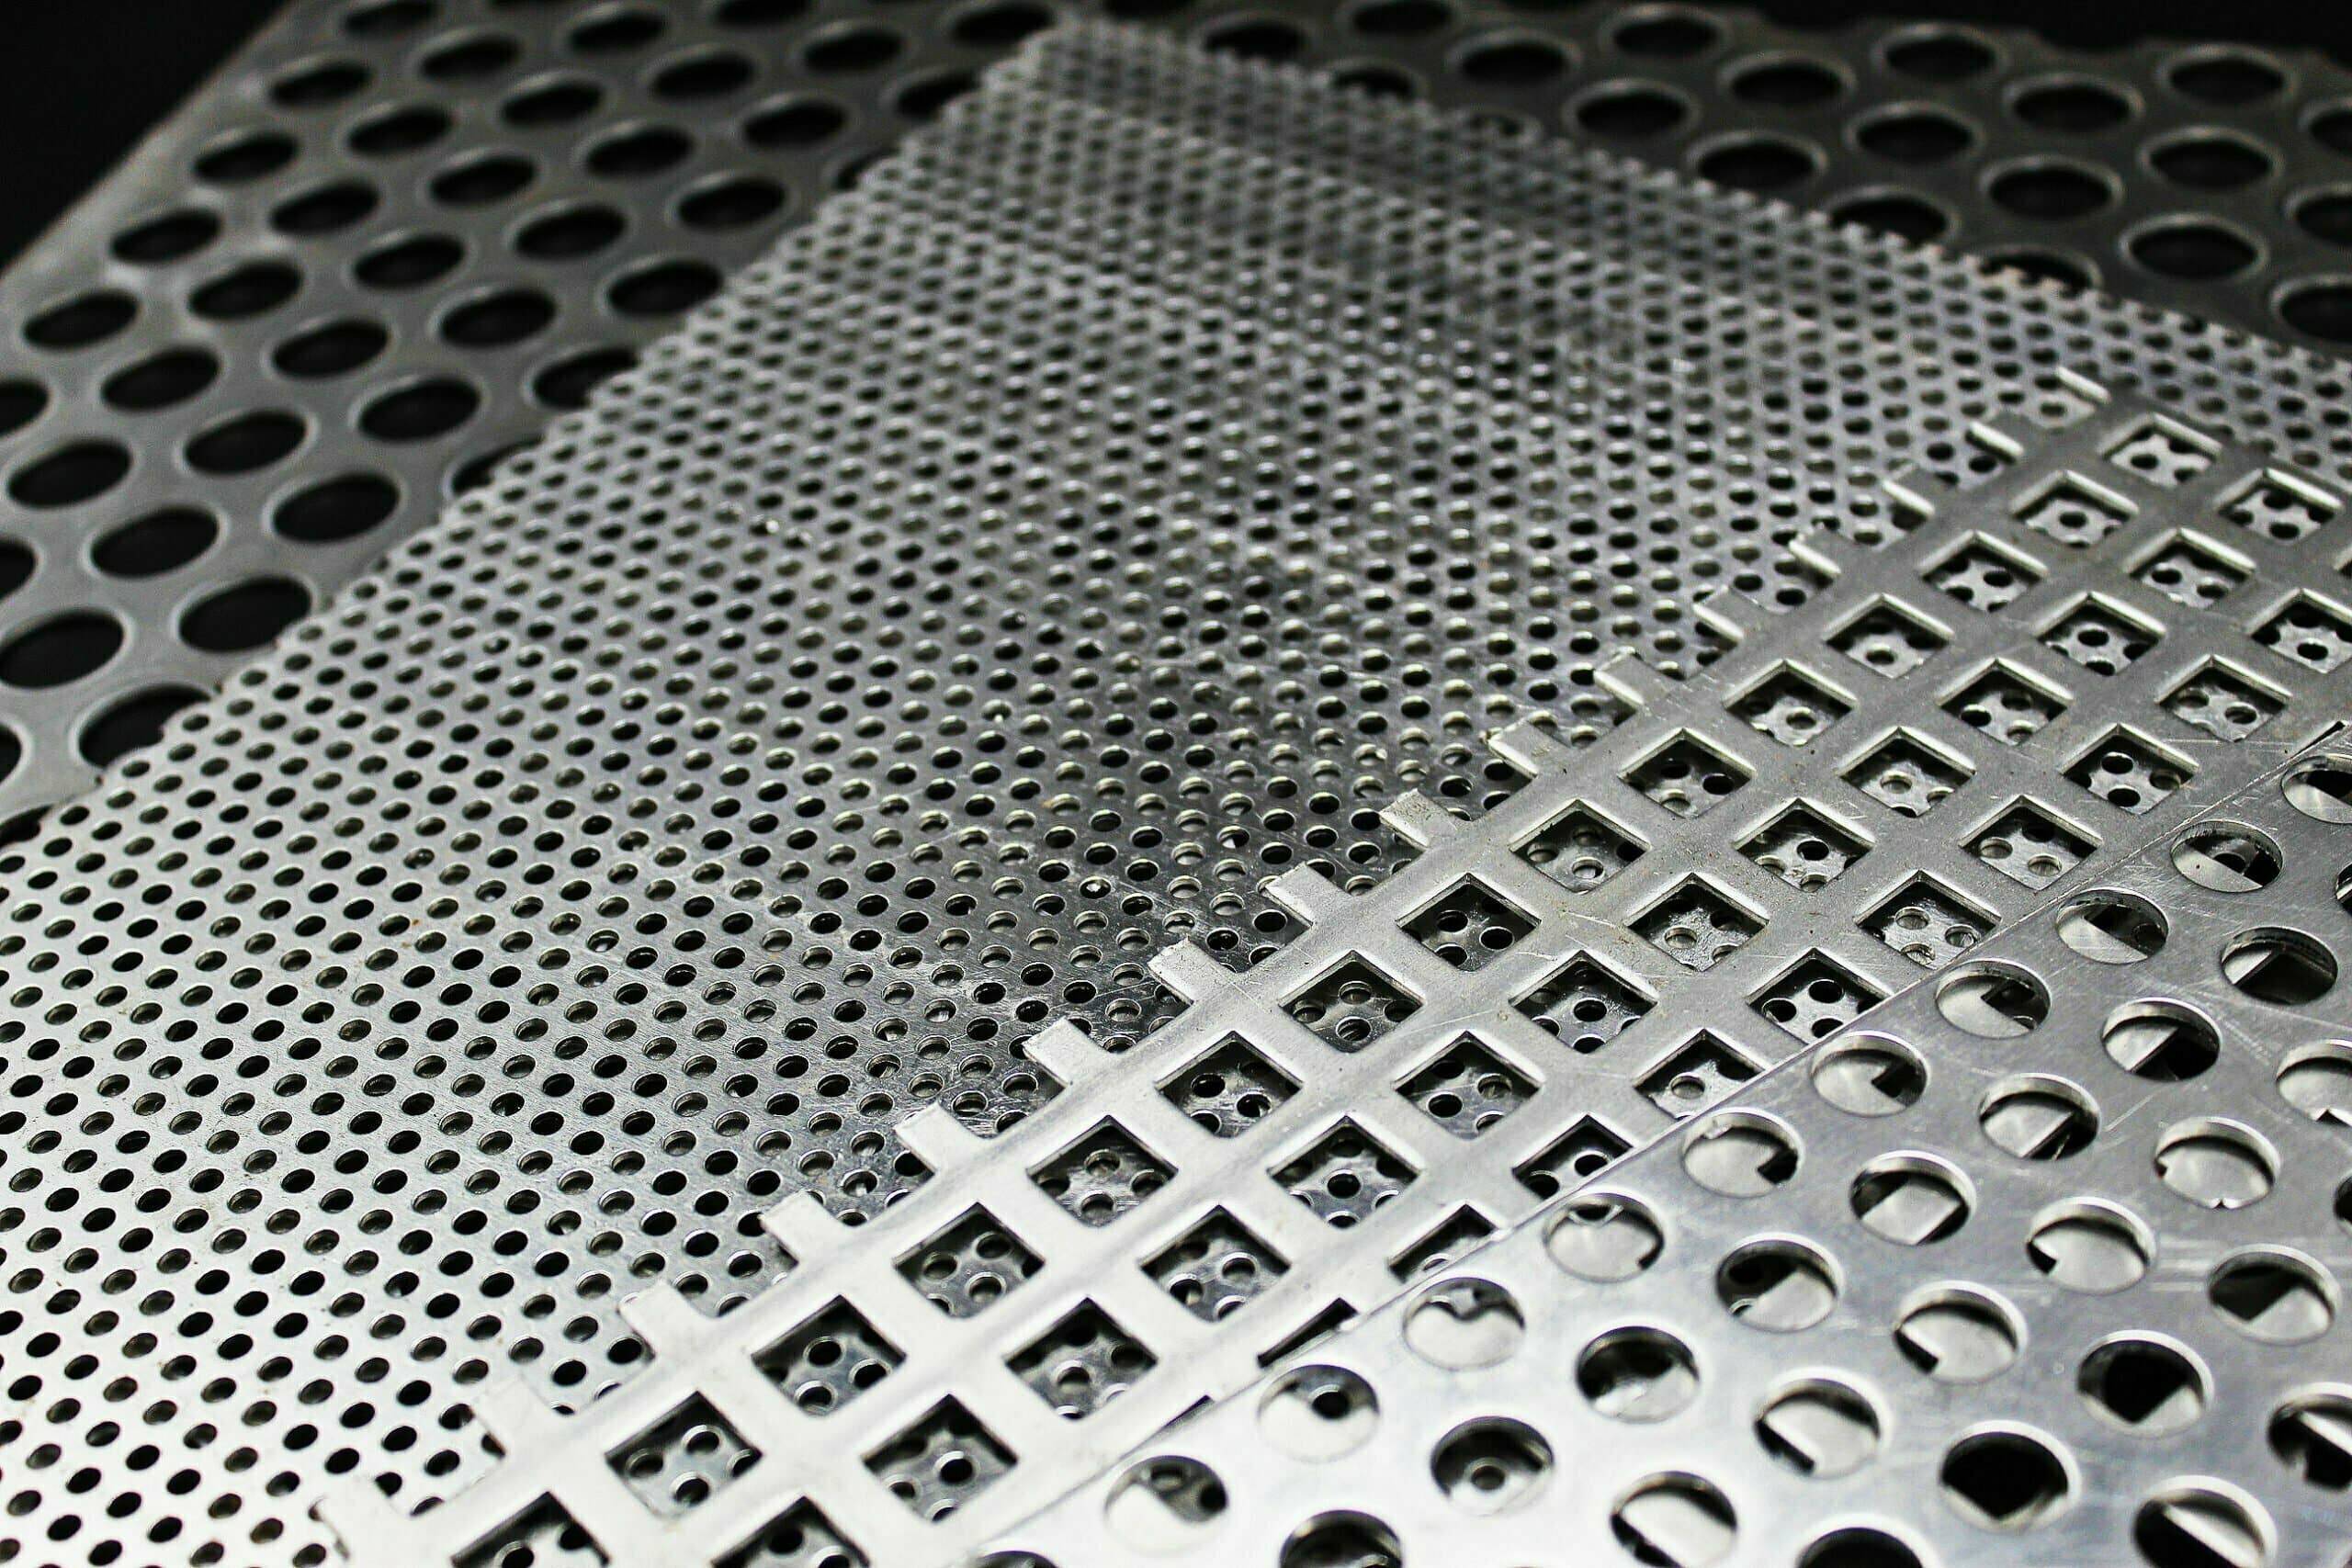 Beautiful stainless steel perforated metal sheet. If you like it